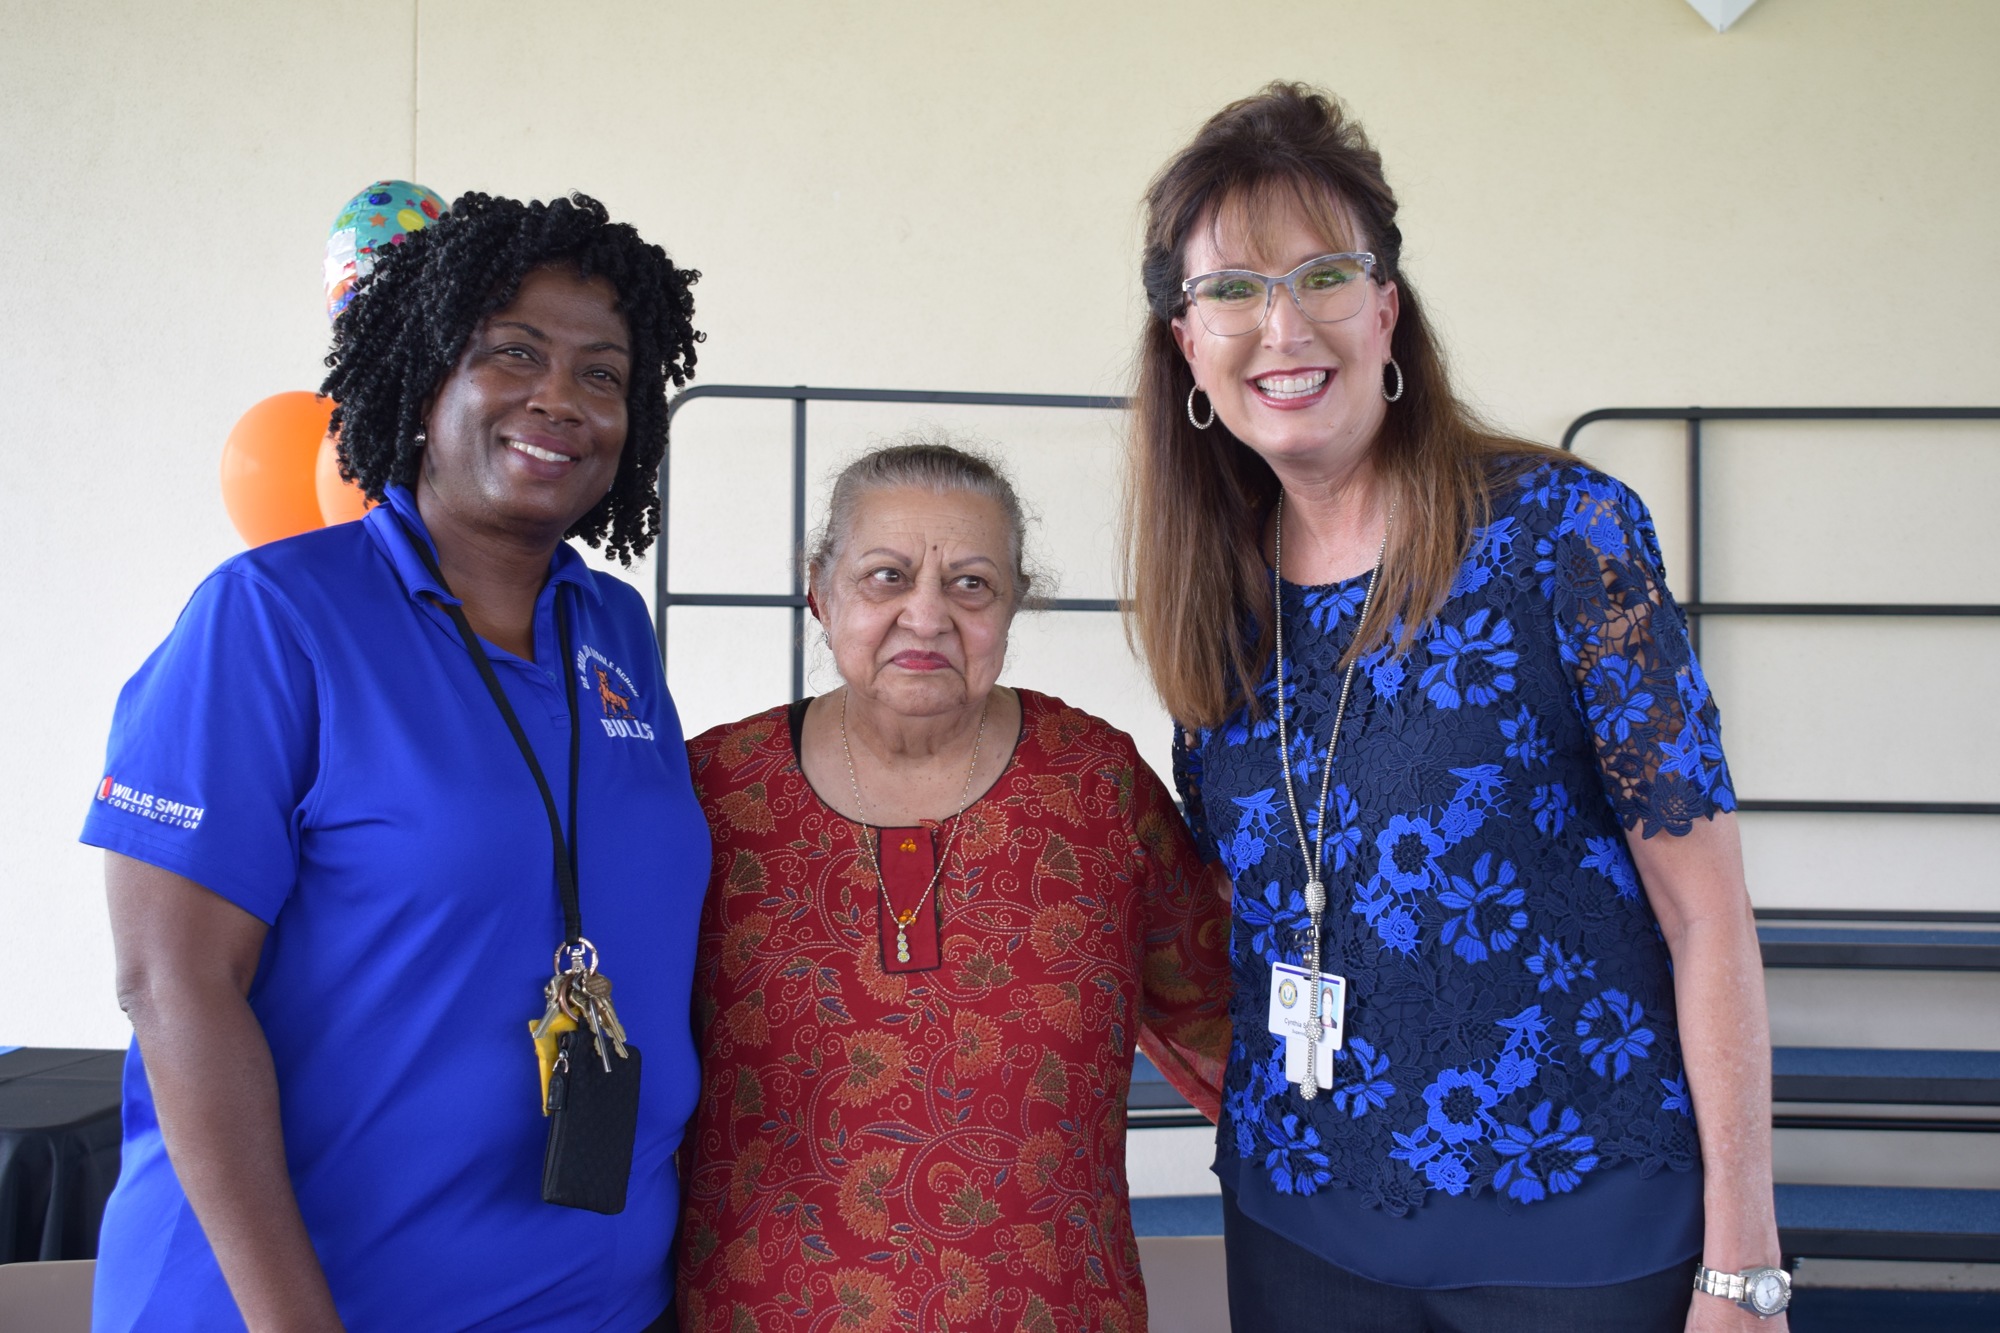 Angela Lindsey, the principal of Dr. Mona Jain Middle School, Mona Jain and Cynthia Saunders, superintendent of the School District of Manatee County, congratulate Mona Jain Middle students on their academic success. File photo.